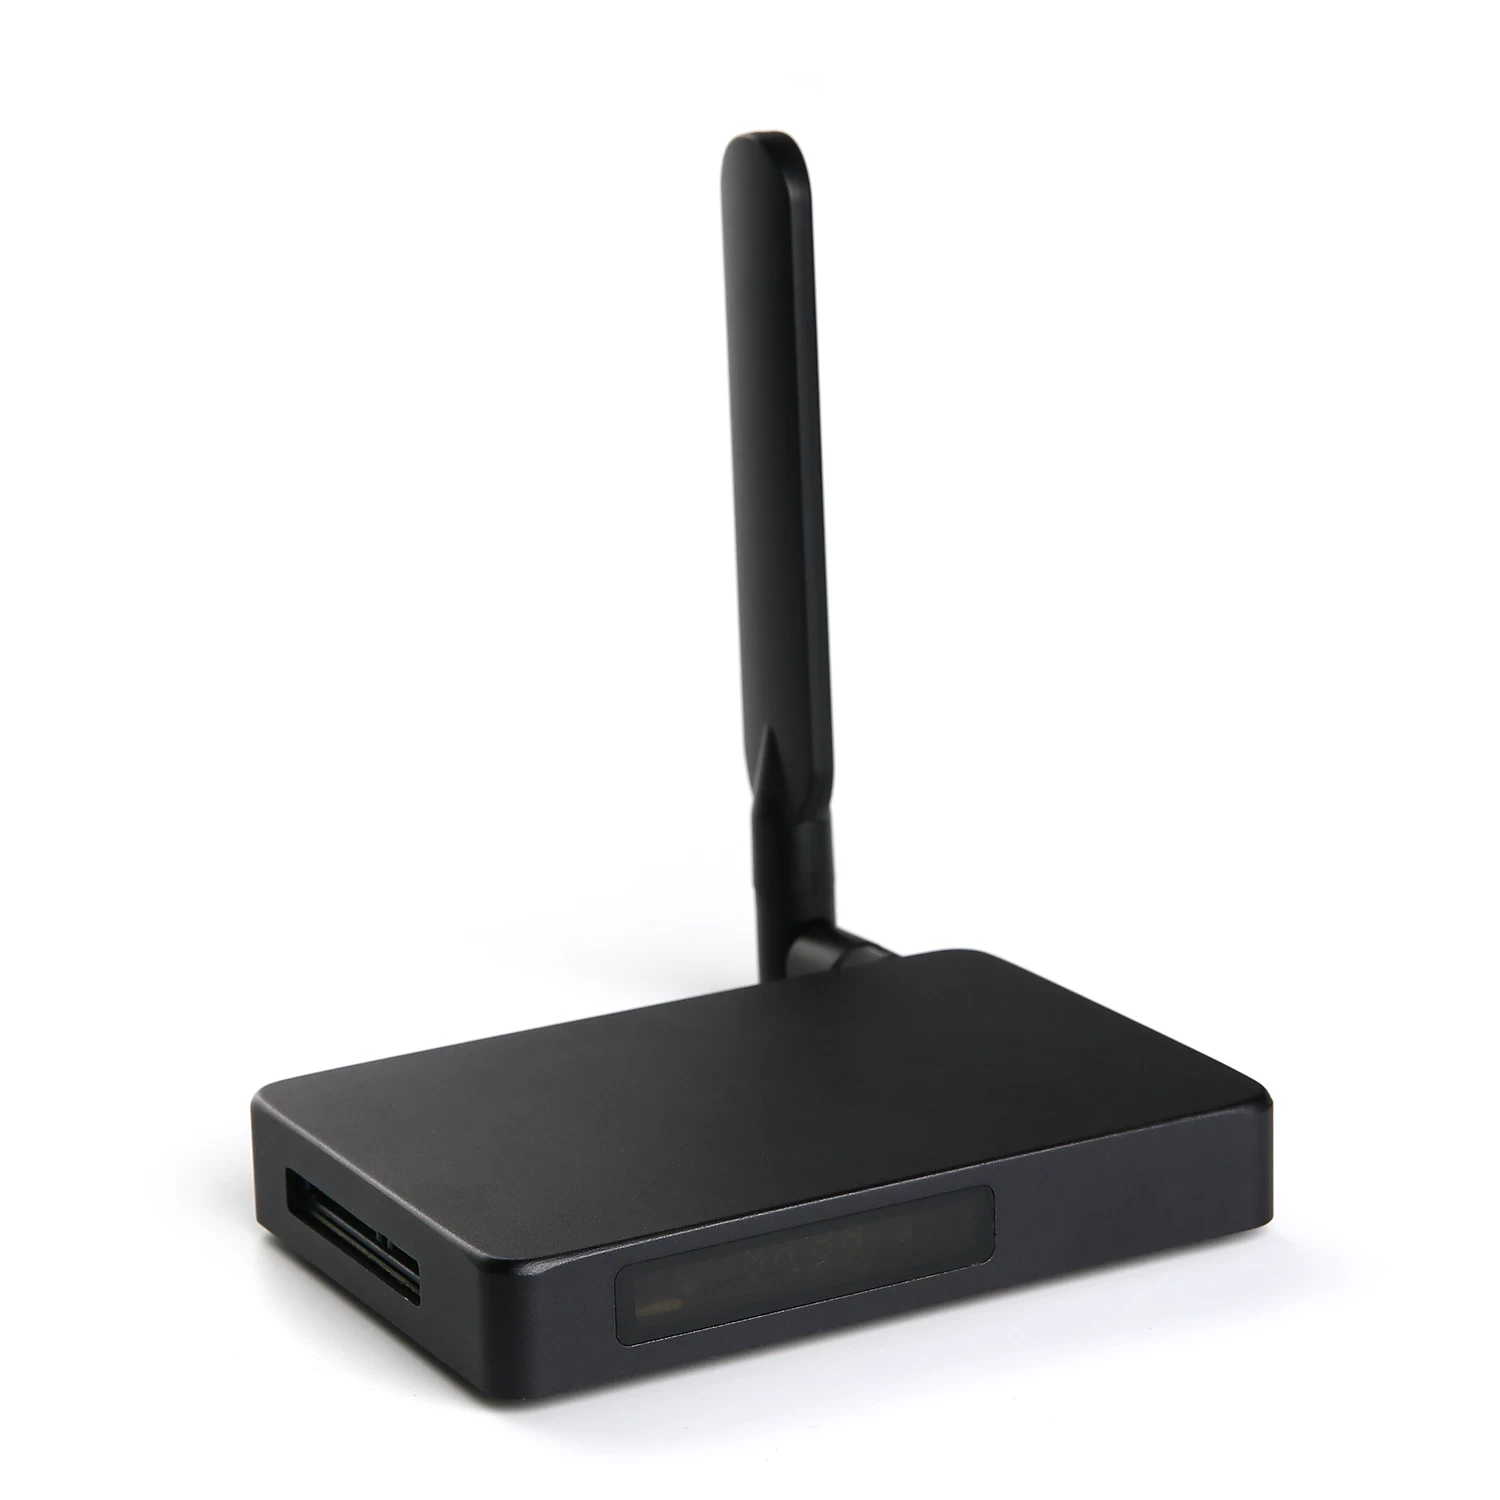 Android Streaming Box HDMI Input, PVR Media Player with HDMI input